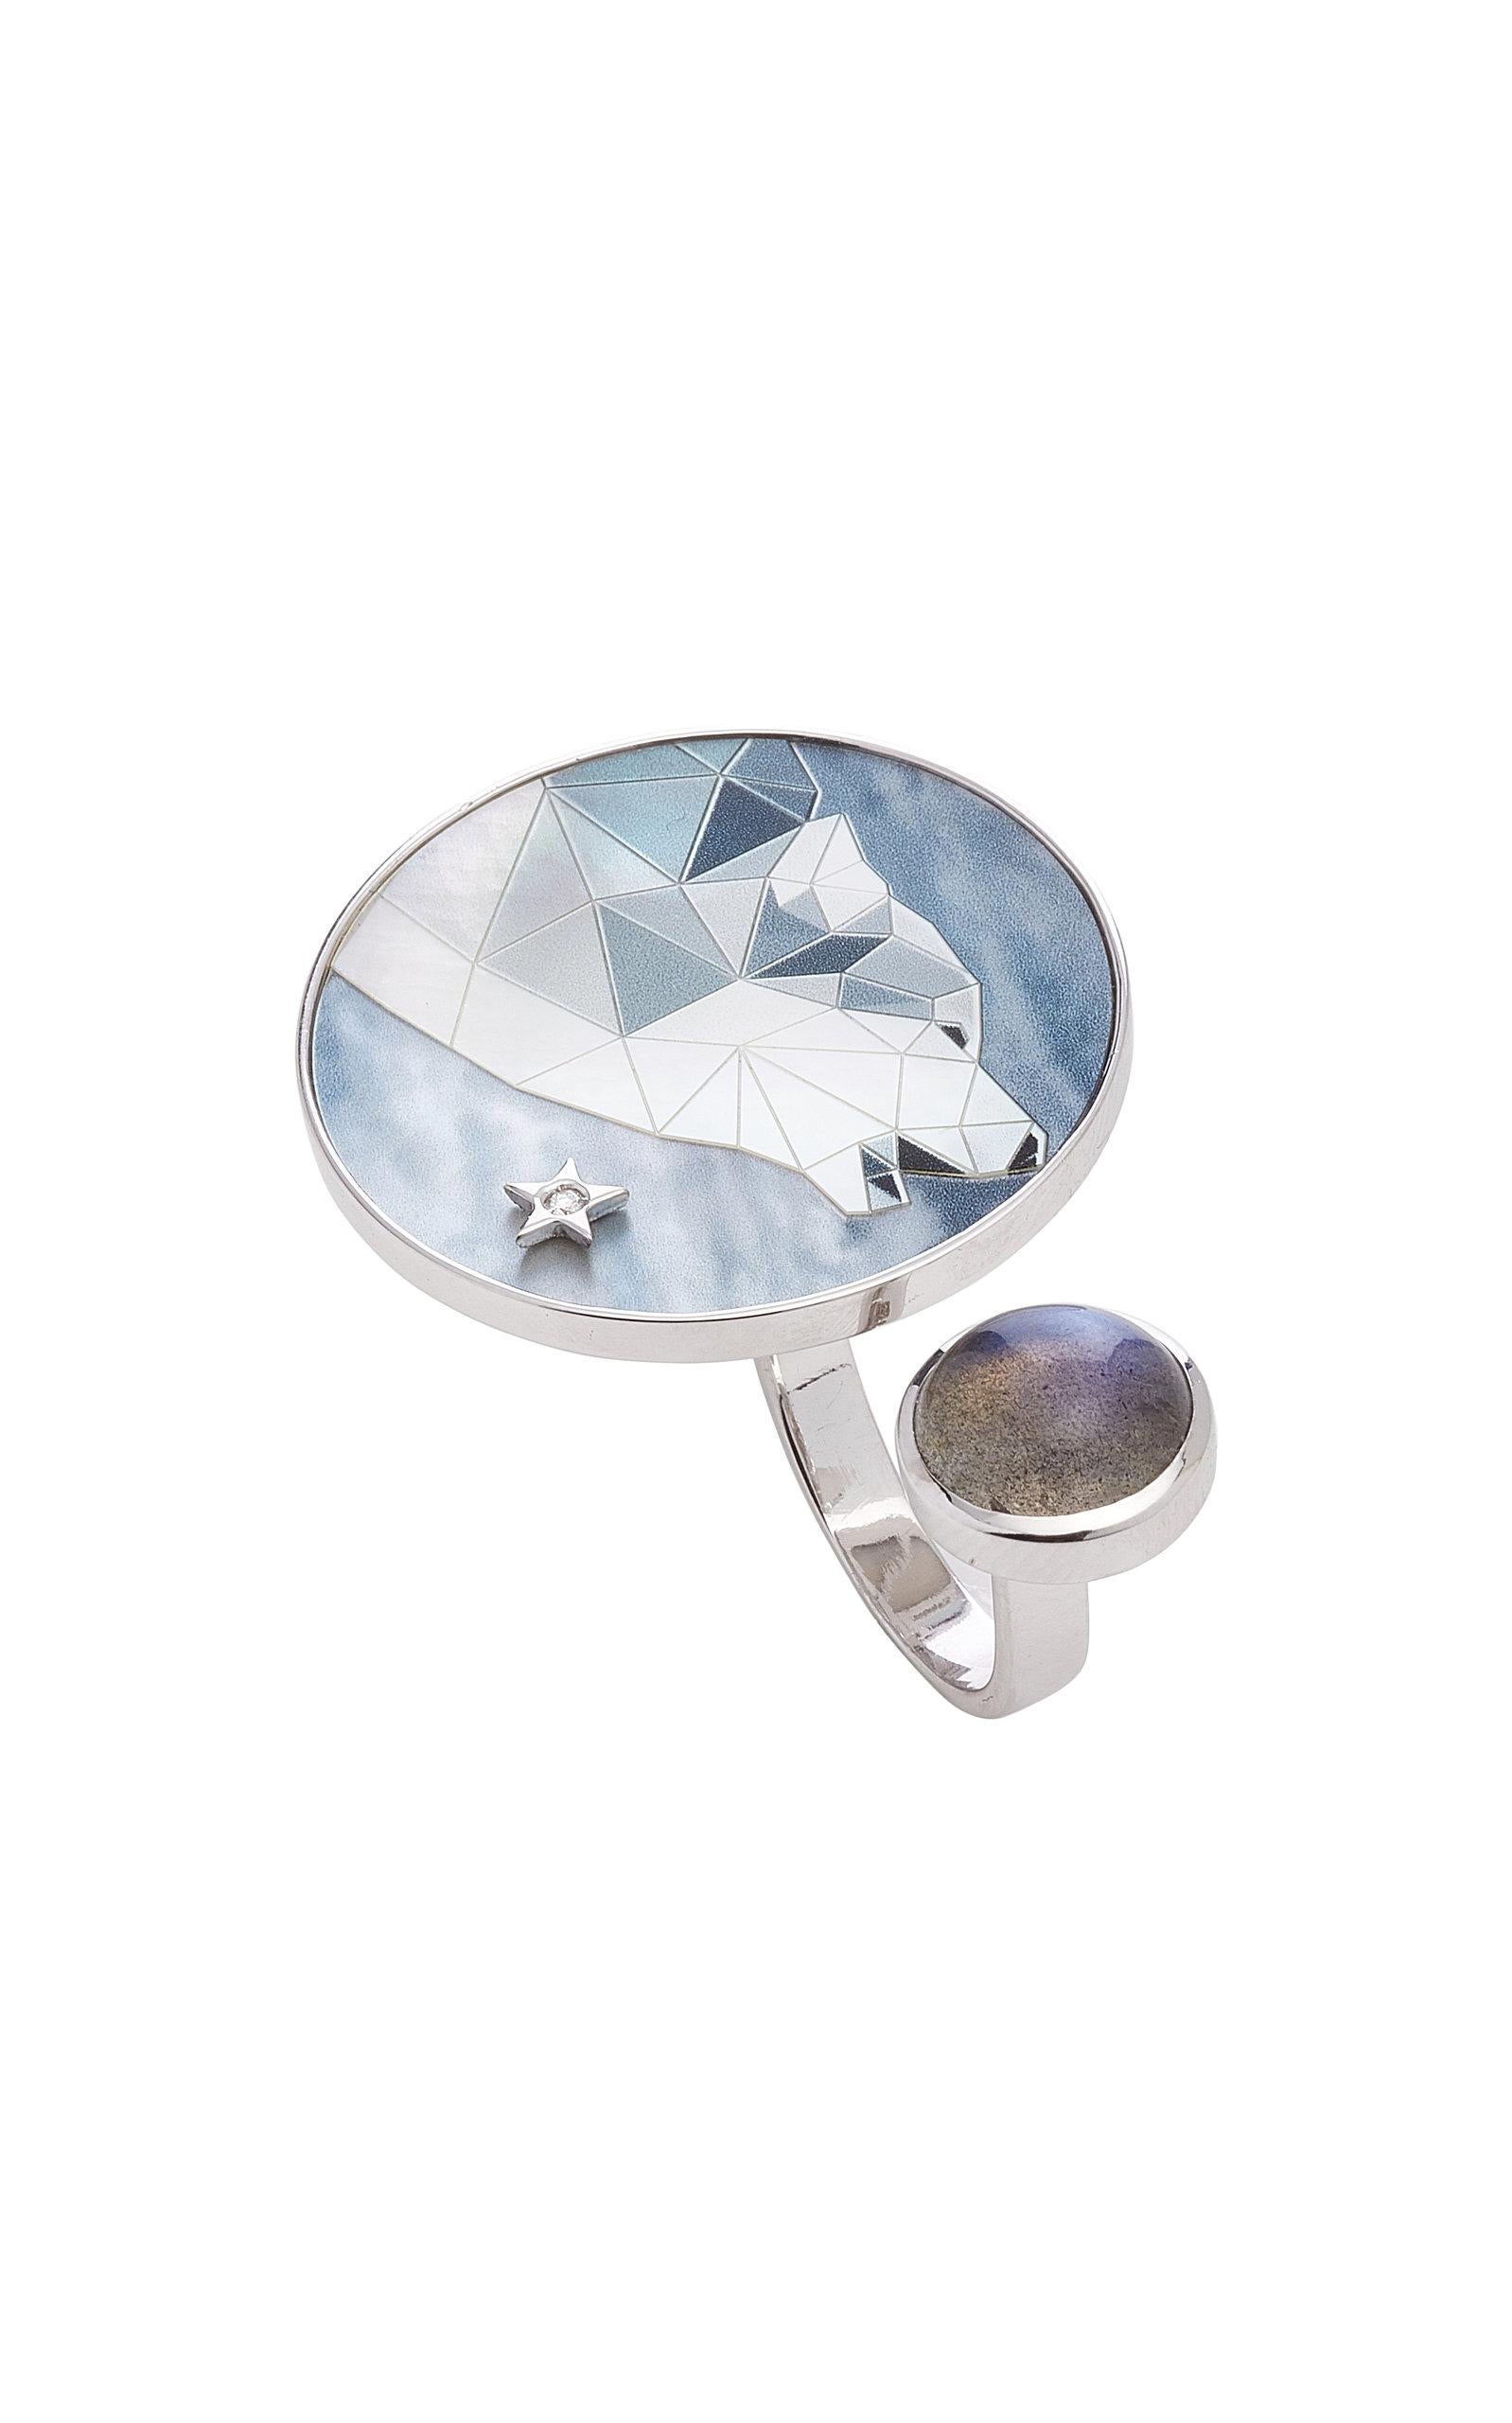 Art Wild Collection - Wolf at the moon - Ring between fingers. 
18K white gold (8 g) - Engraved and hand painted wolf on mother of pearl expresses a movement through the action of howling at the moon.
Wolf is a very special animal, it represents